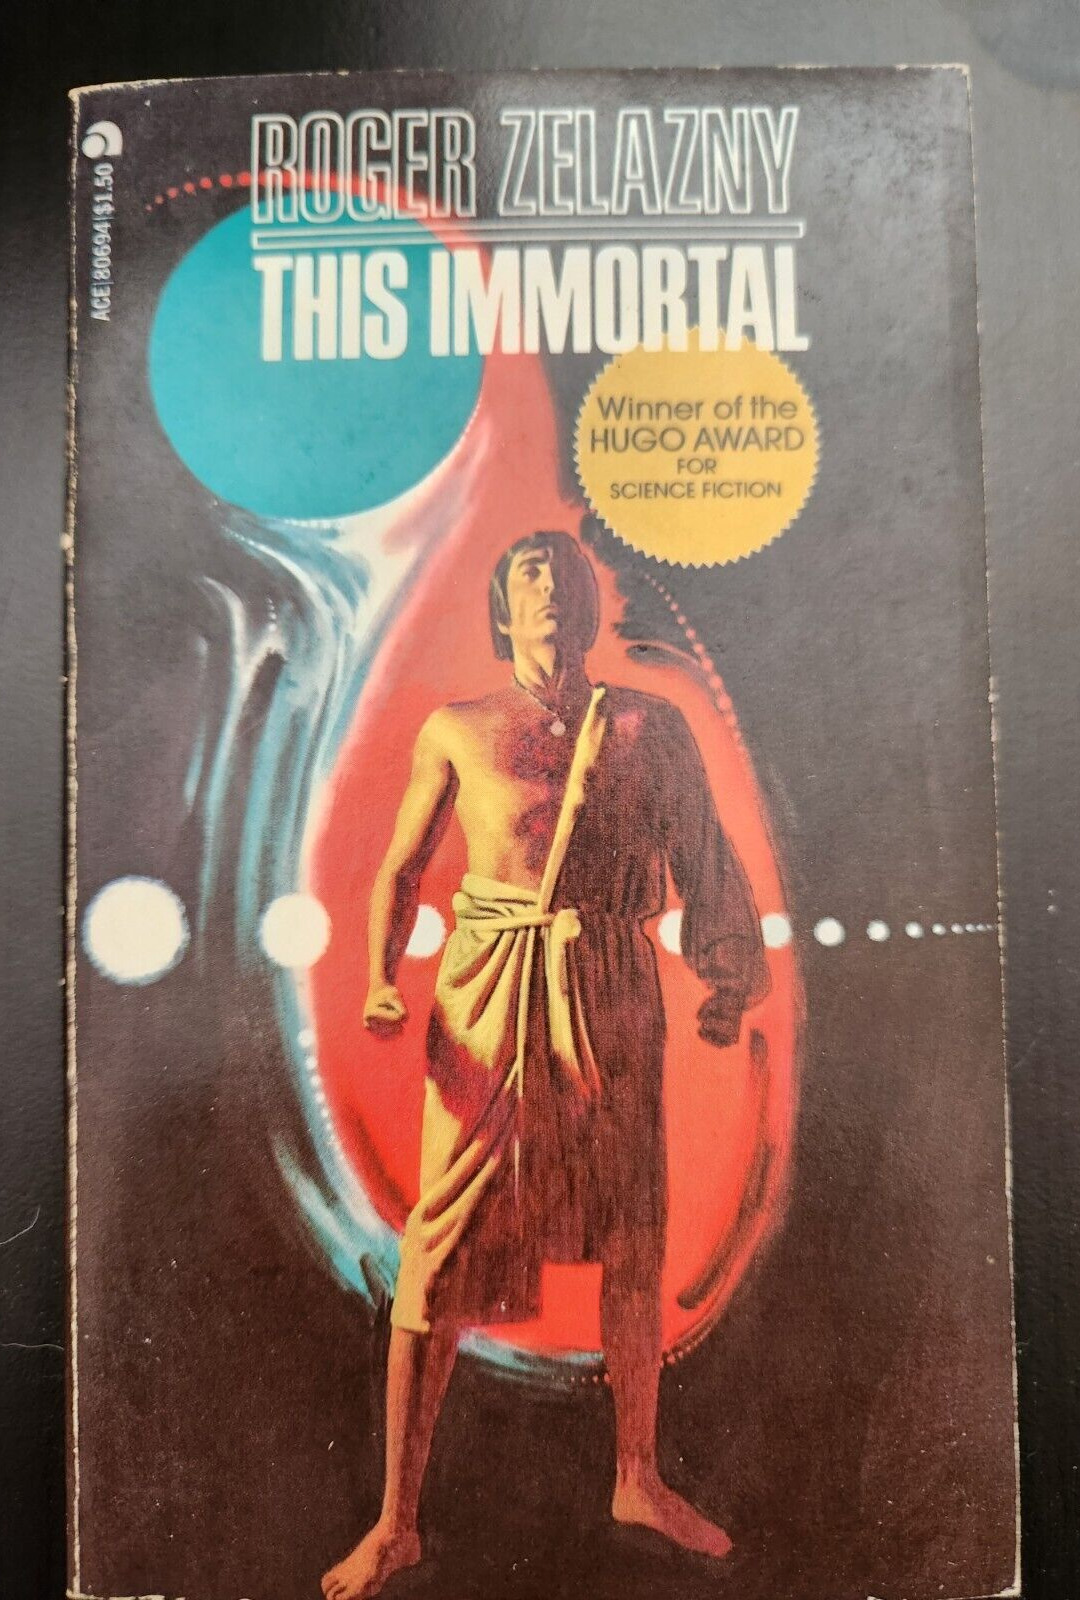 This Immortal-Roger Zelazny-Ace 80694 Collectible-V Good Condition